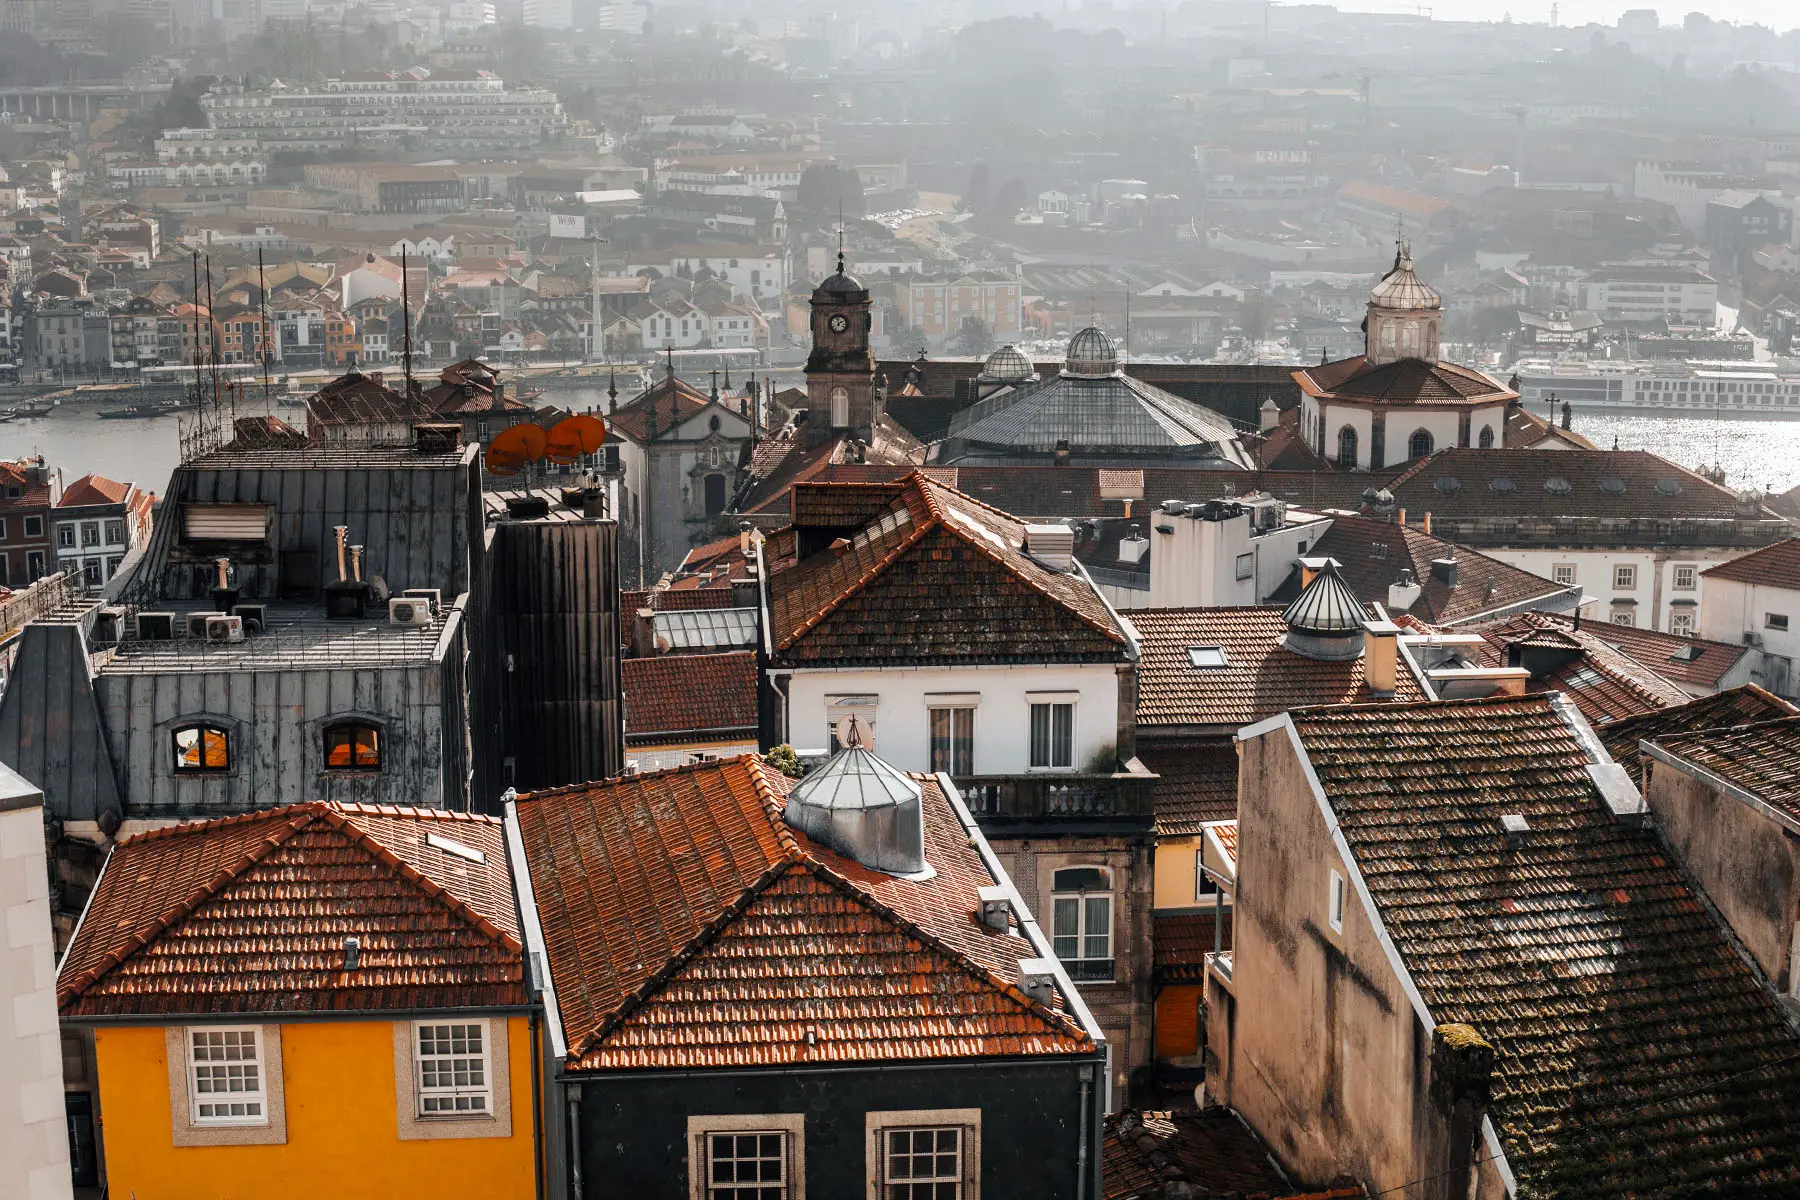 Rooftops of old buildings near the river in Oporto.